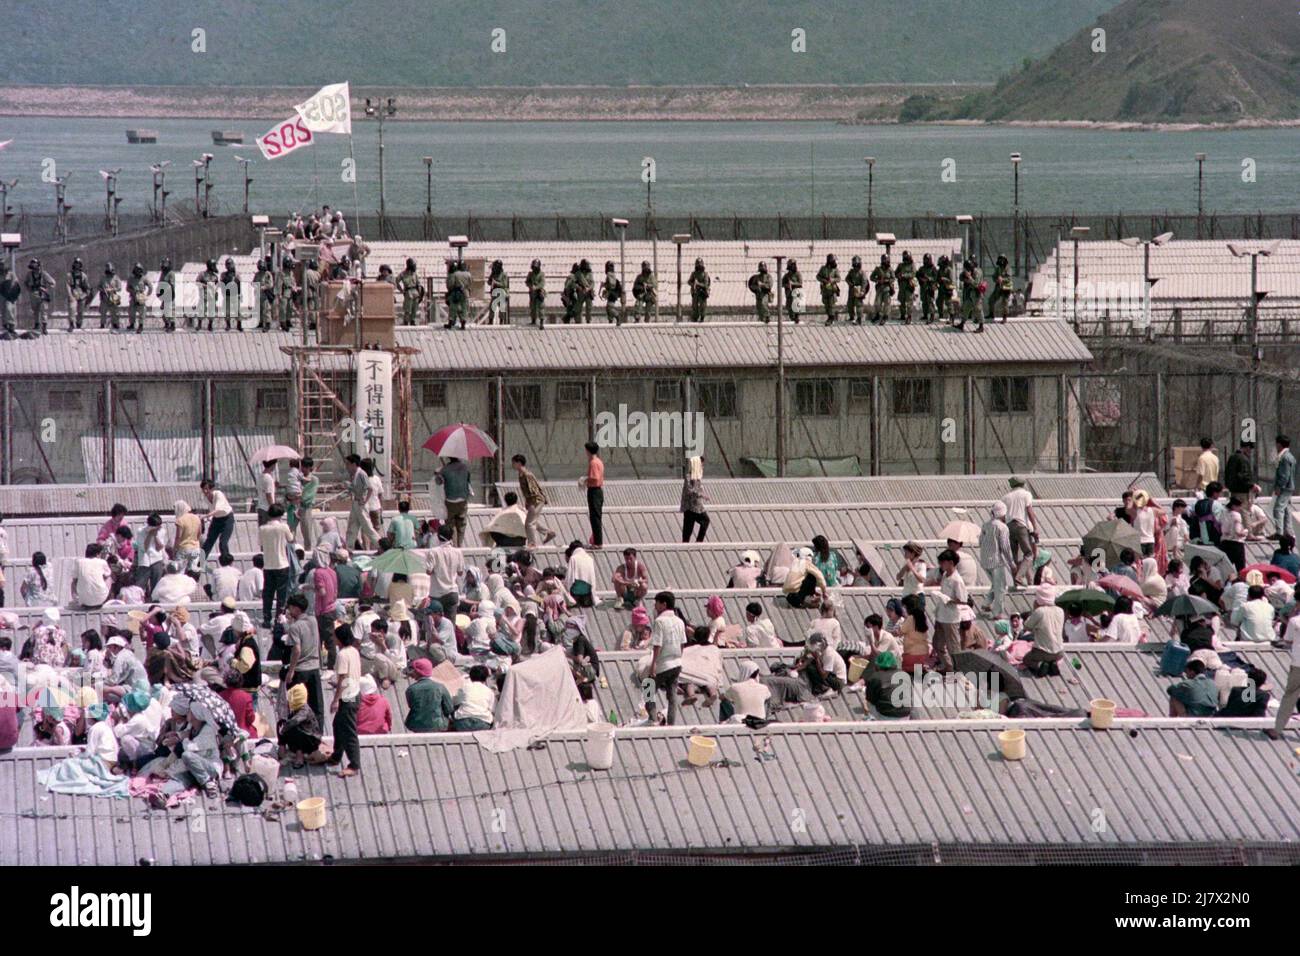 Whitehead Vietnamese Detention Centre, Police clearance operation, April 1994. Some of the Vietnamese Detainees refused to leave the centre and climbed onto the roofs of their blocks.  Tear Smoke (Tear Gas) was eventually used to try to bring them down. Stock Photo